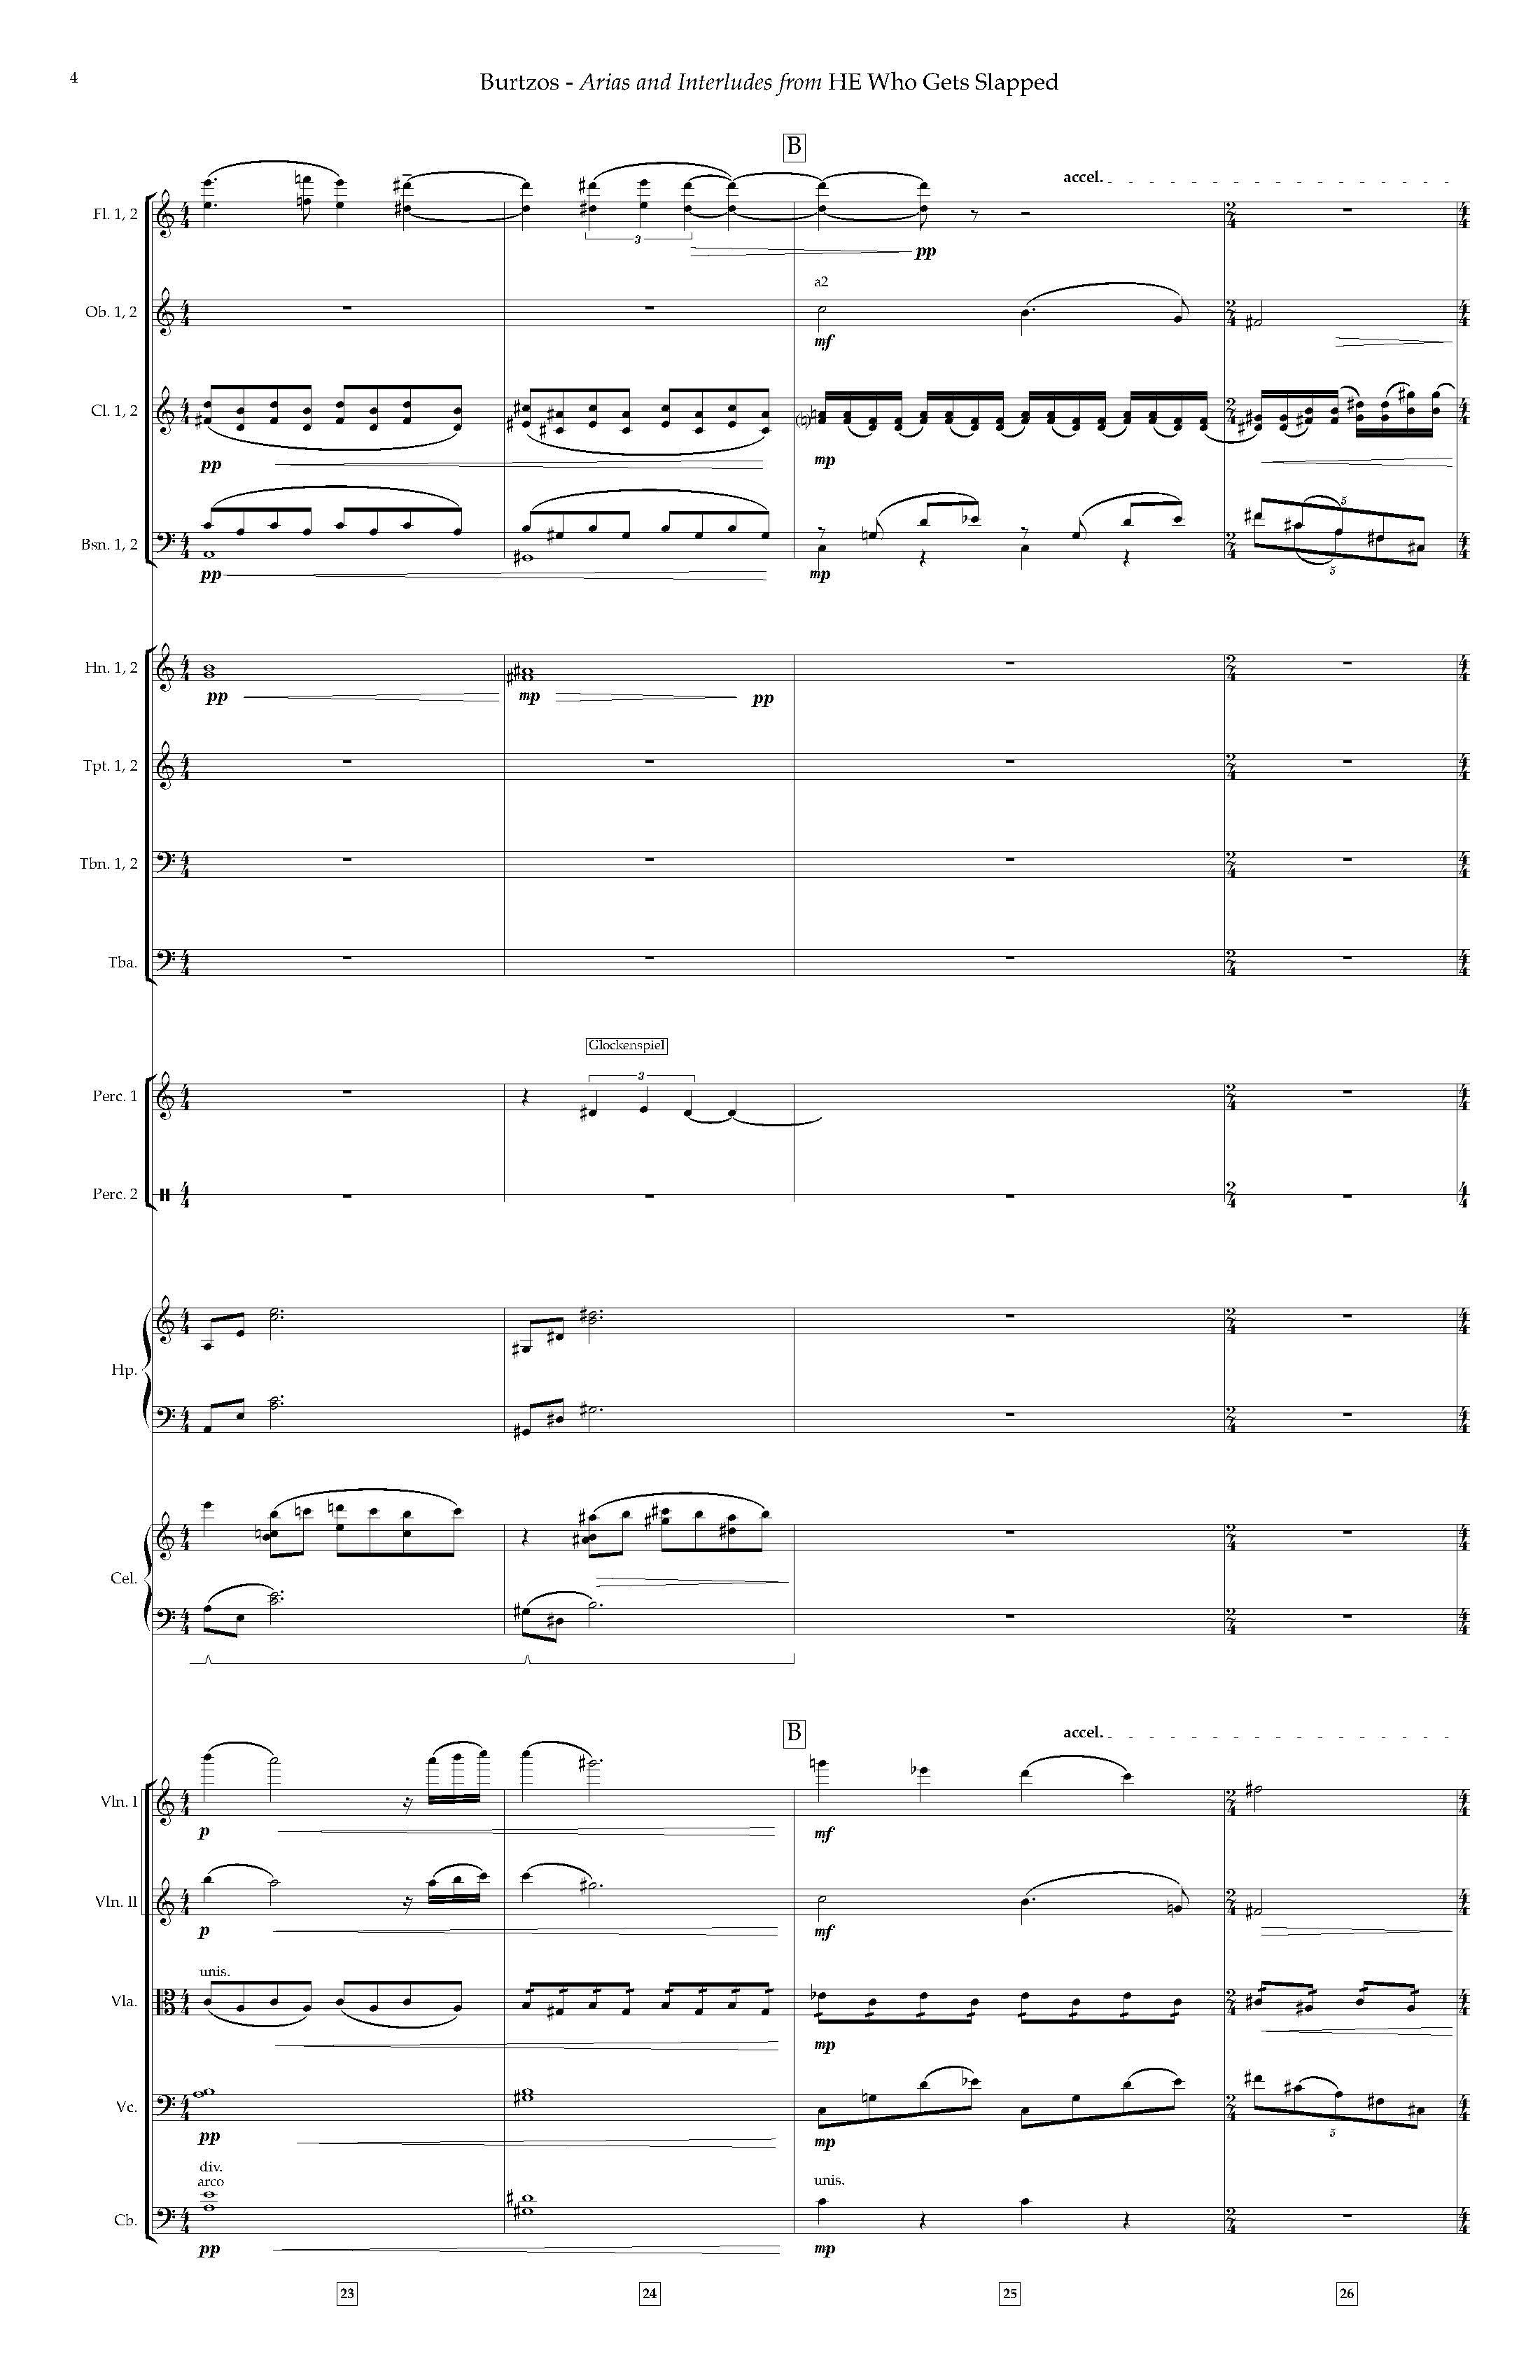 Arias and Interludes from HWGS - Complete Score_Page_10.jpg